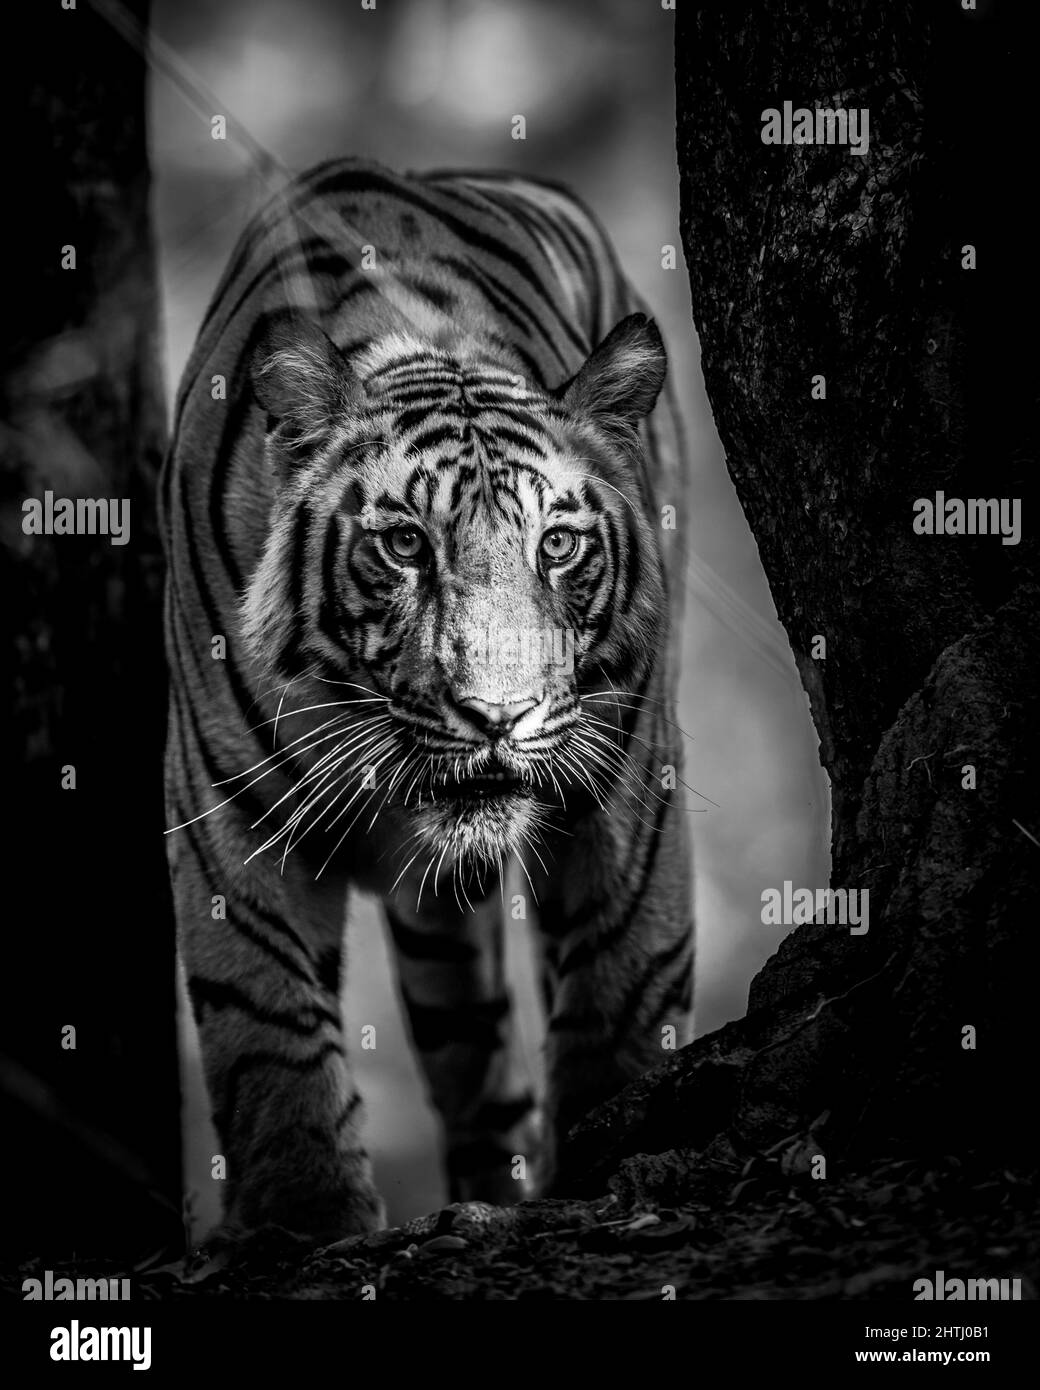 indian wild male tiger head on fine art black and white portrait with eye contact during outdoor wildlife jungle safari at bandhavgarh national park Stock Photo